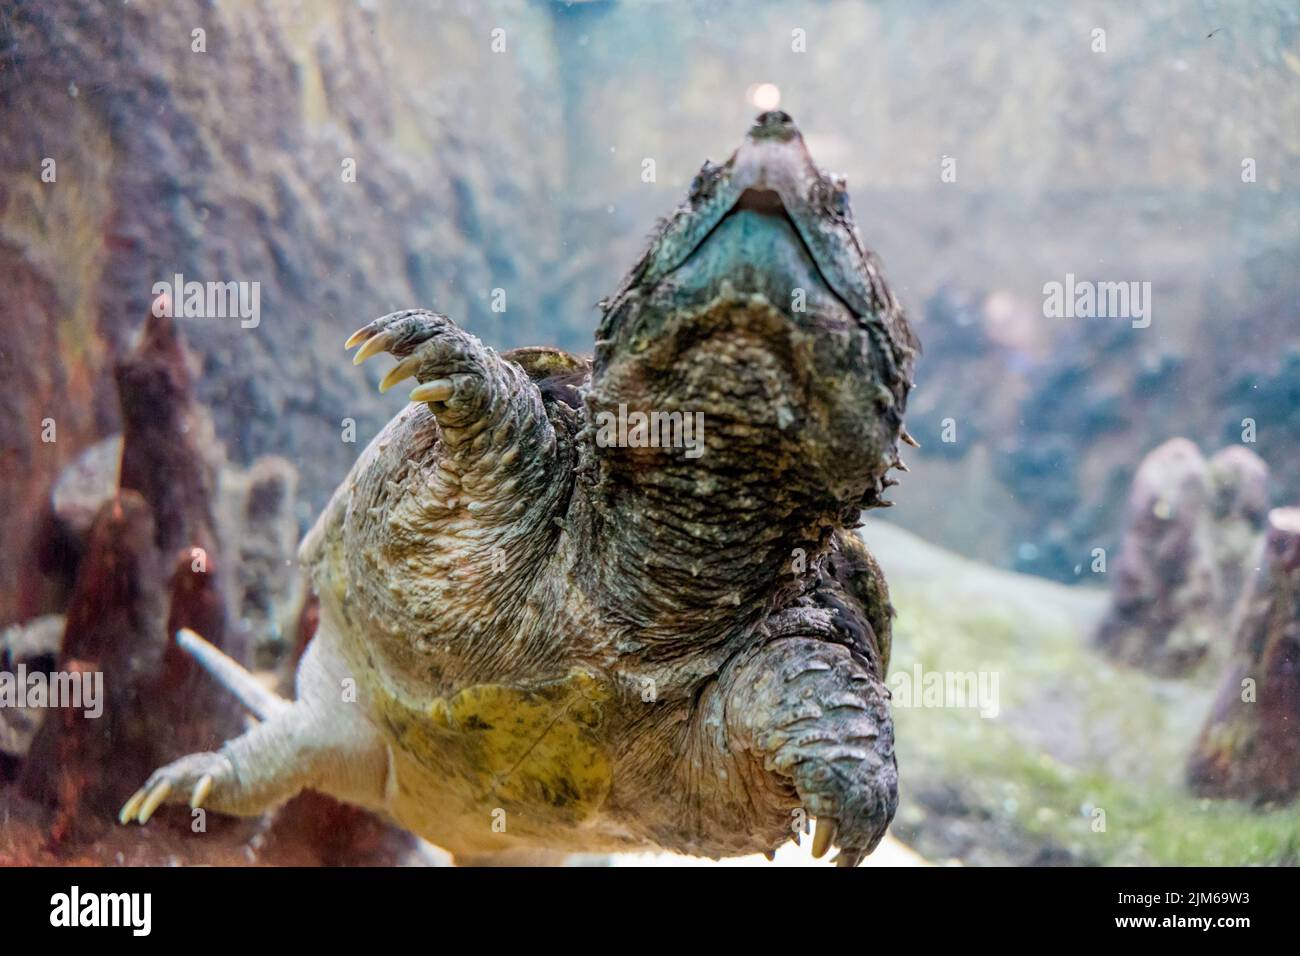 A closeup of an alligator snapping turtle, Macrochelys temminckii. Selected focus. Stock Photo